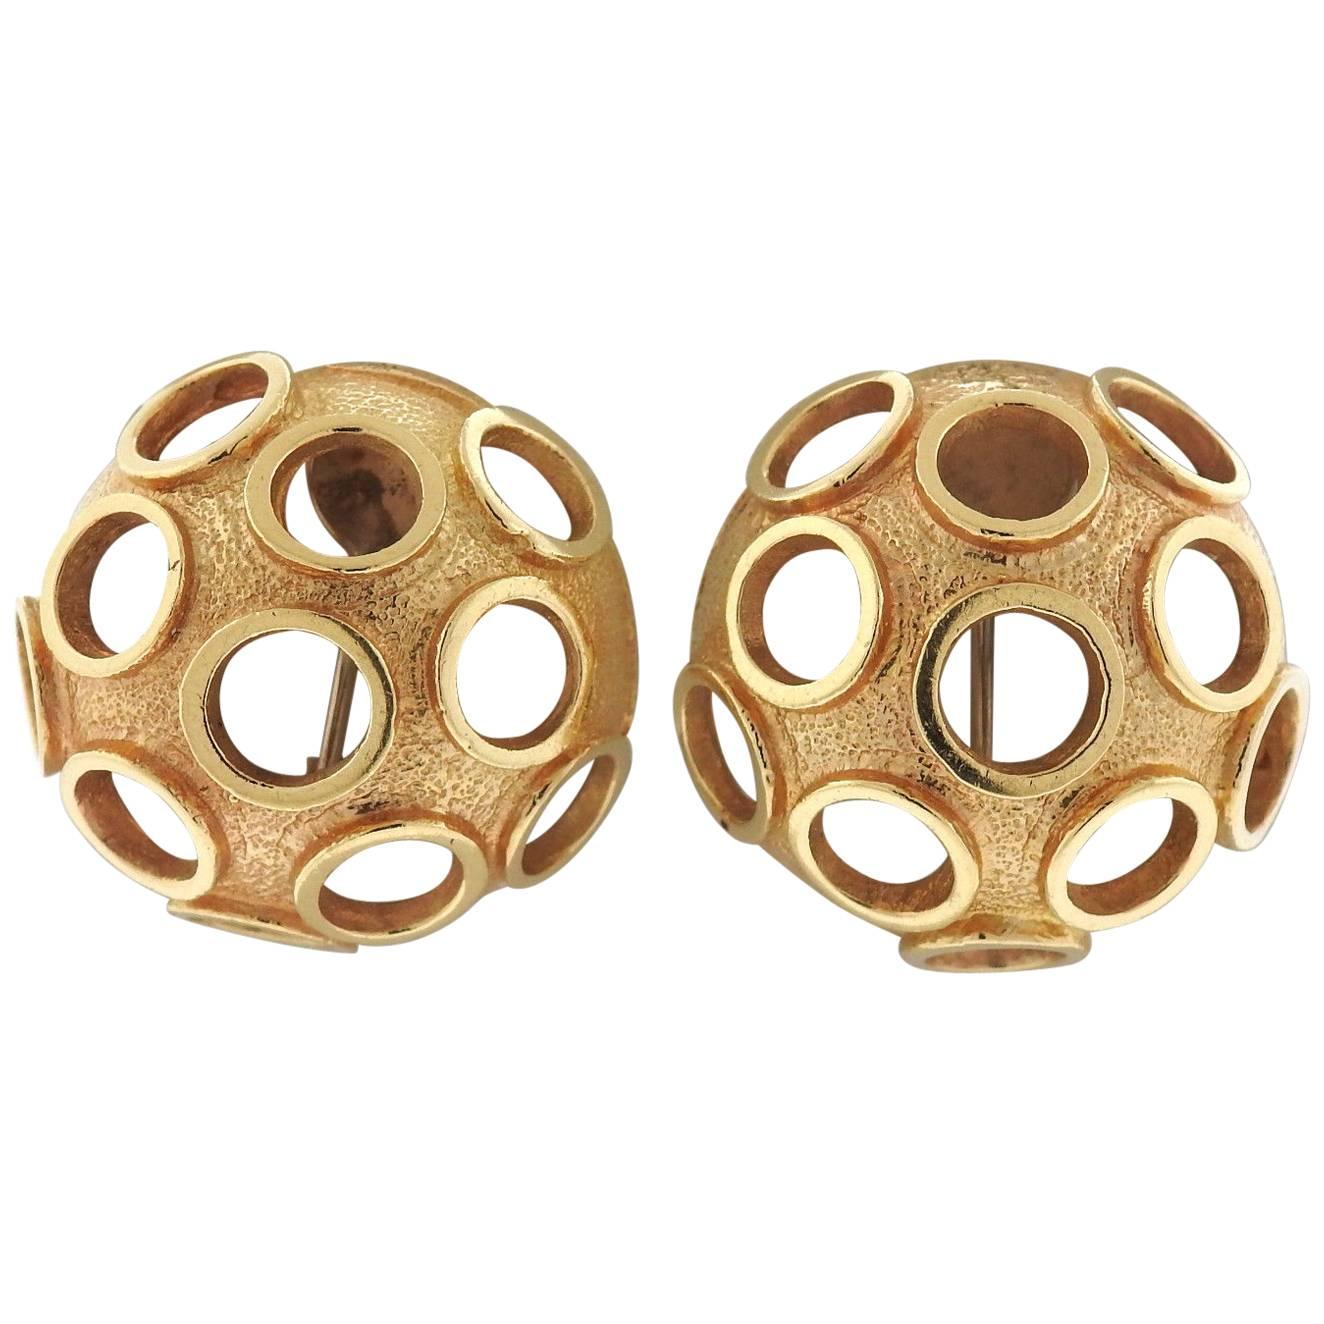 Unusual Gold Open Circle Dome Crater Earrings